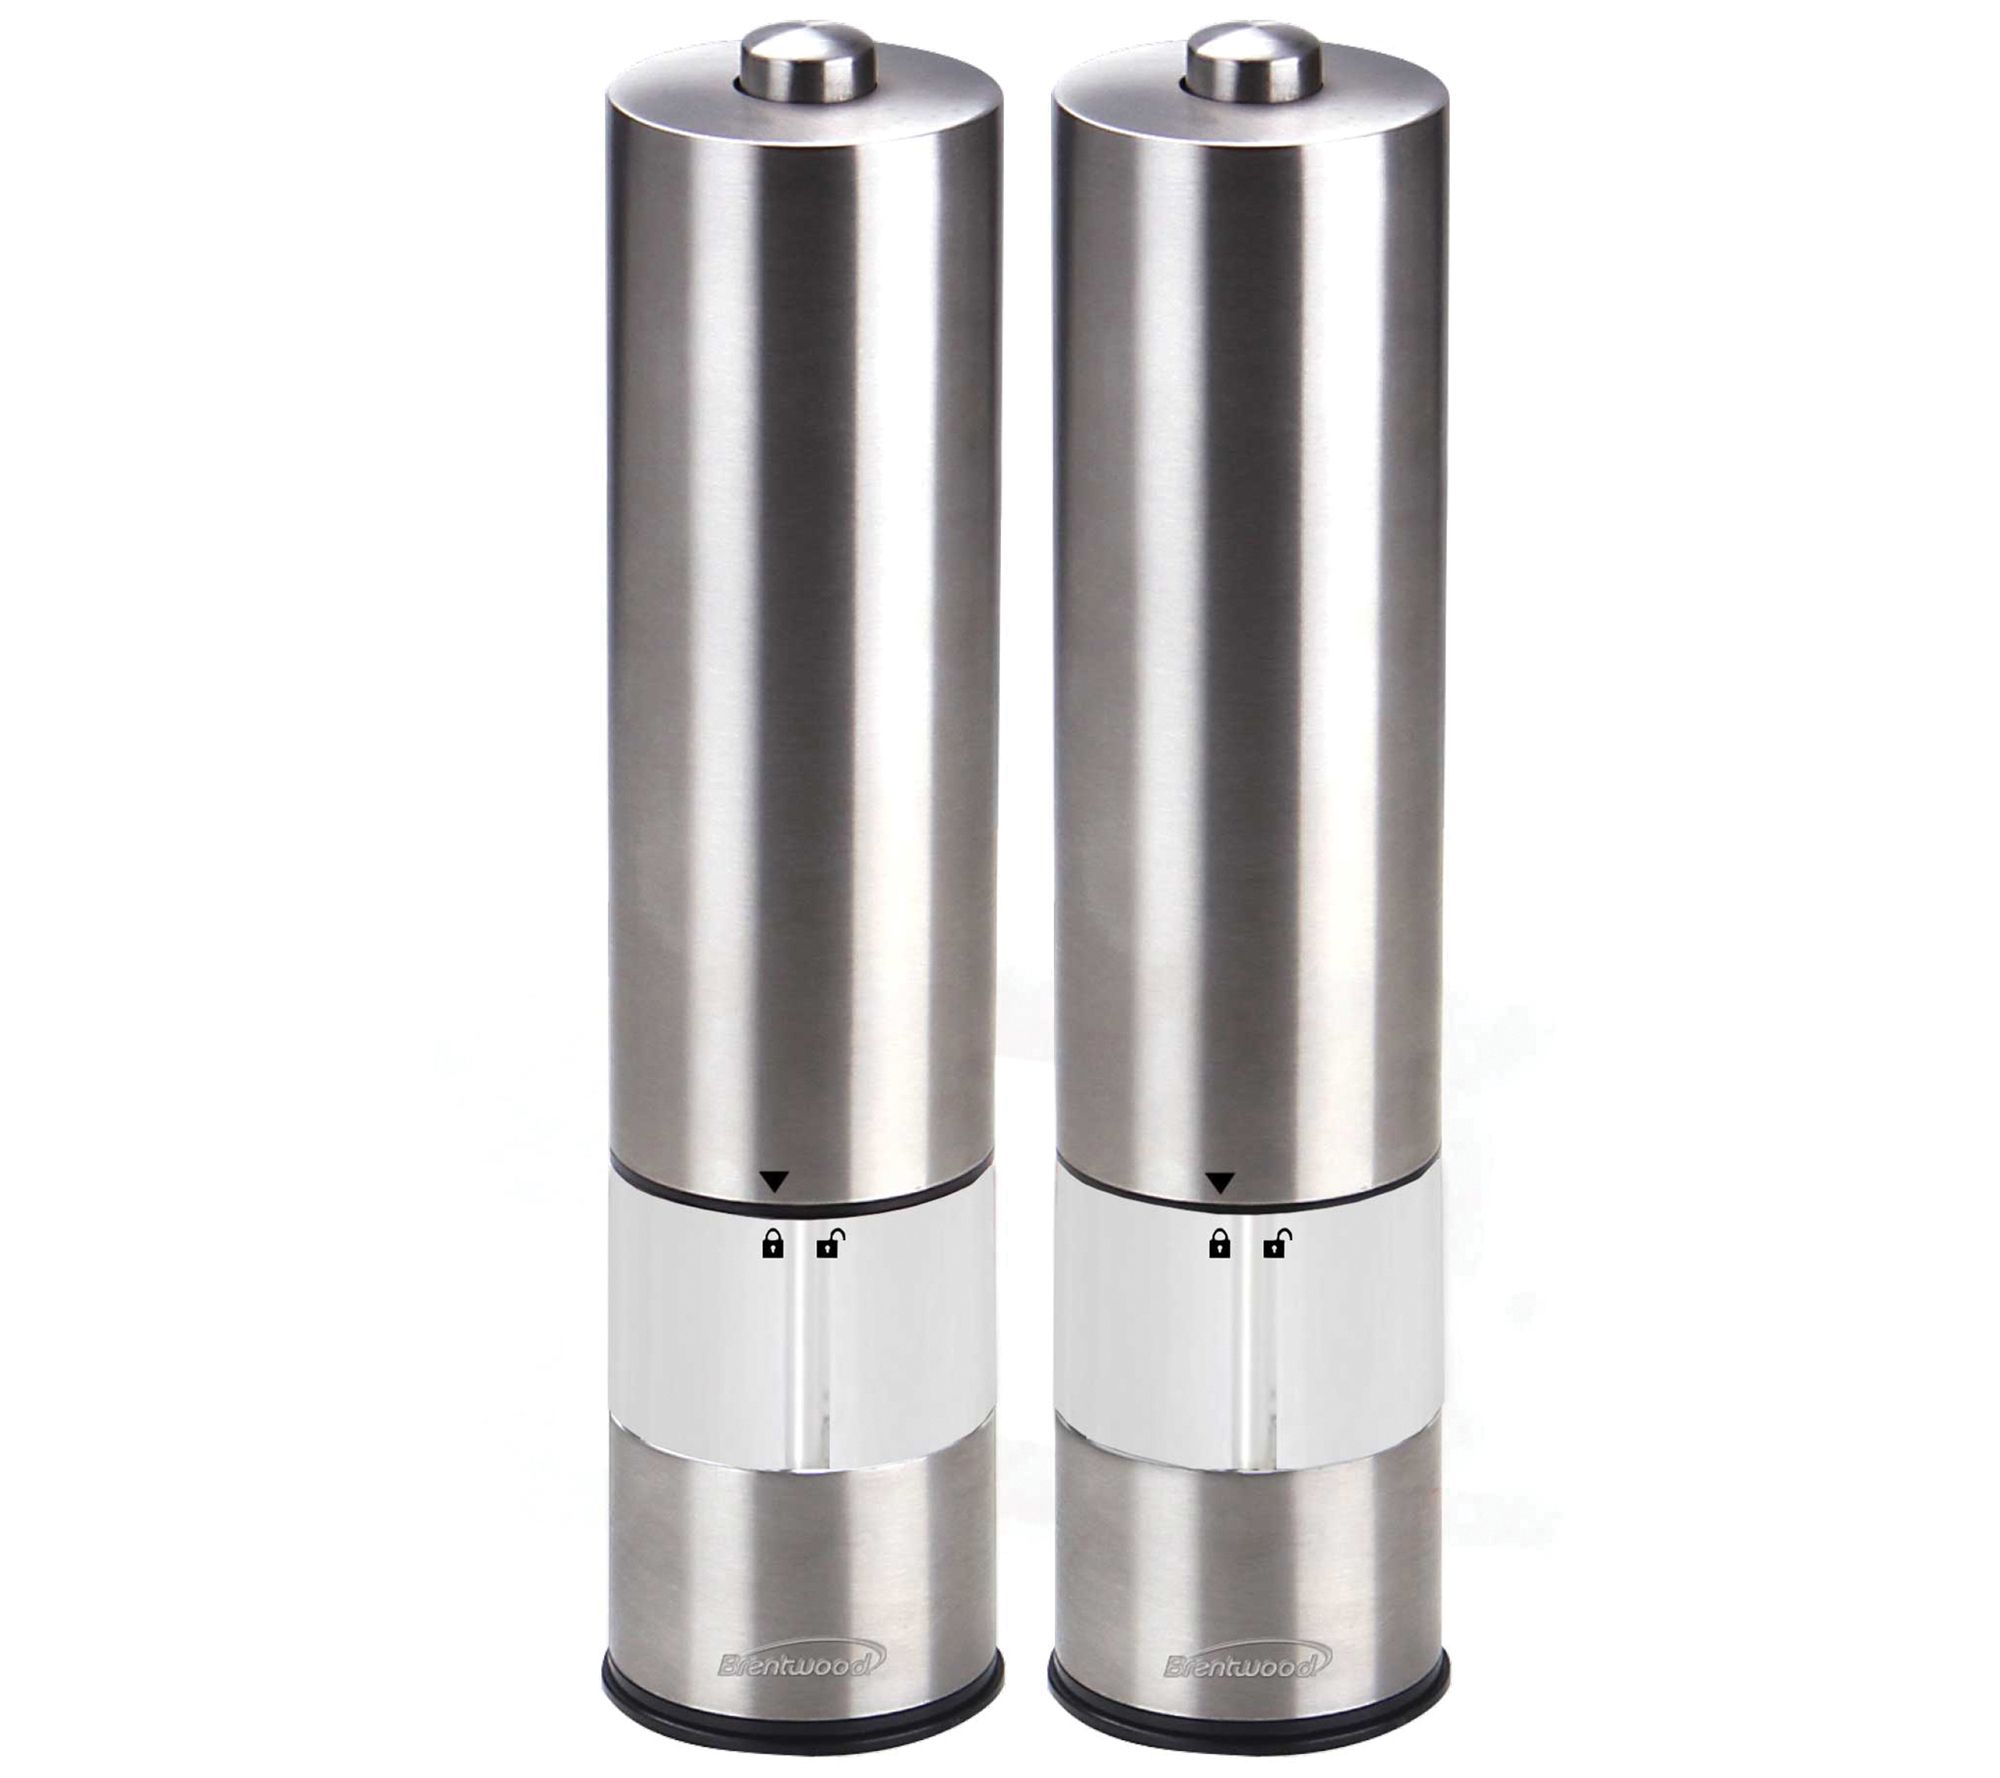 Brentwood Electric Stainless Steel Salt and Pepper Grinders 